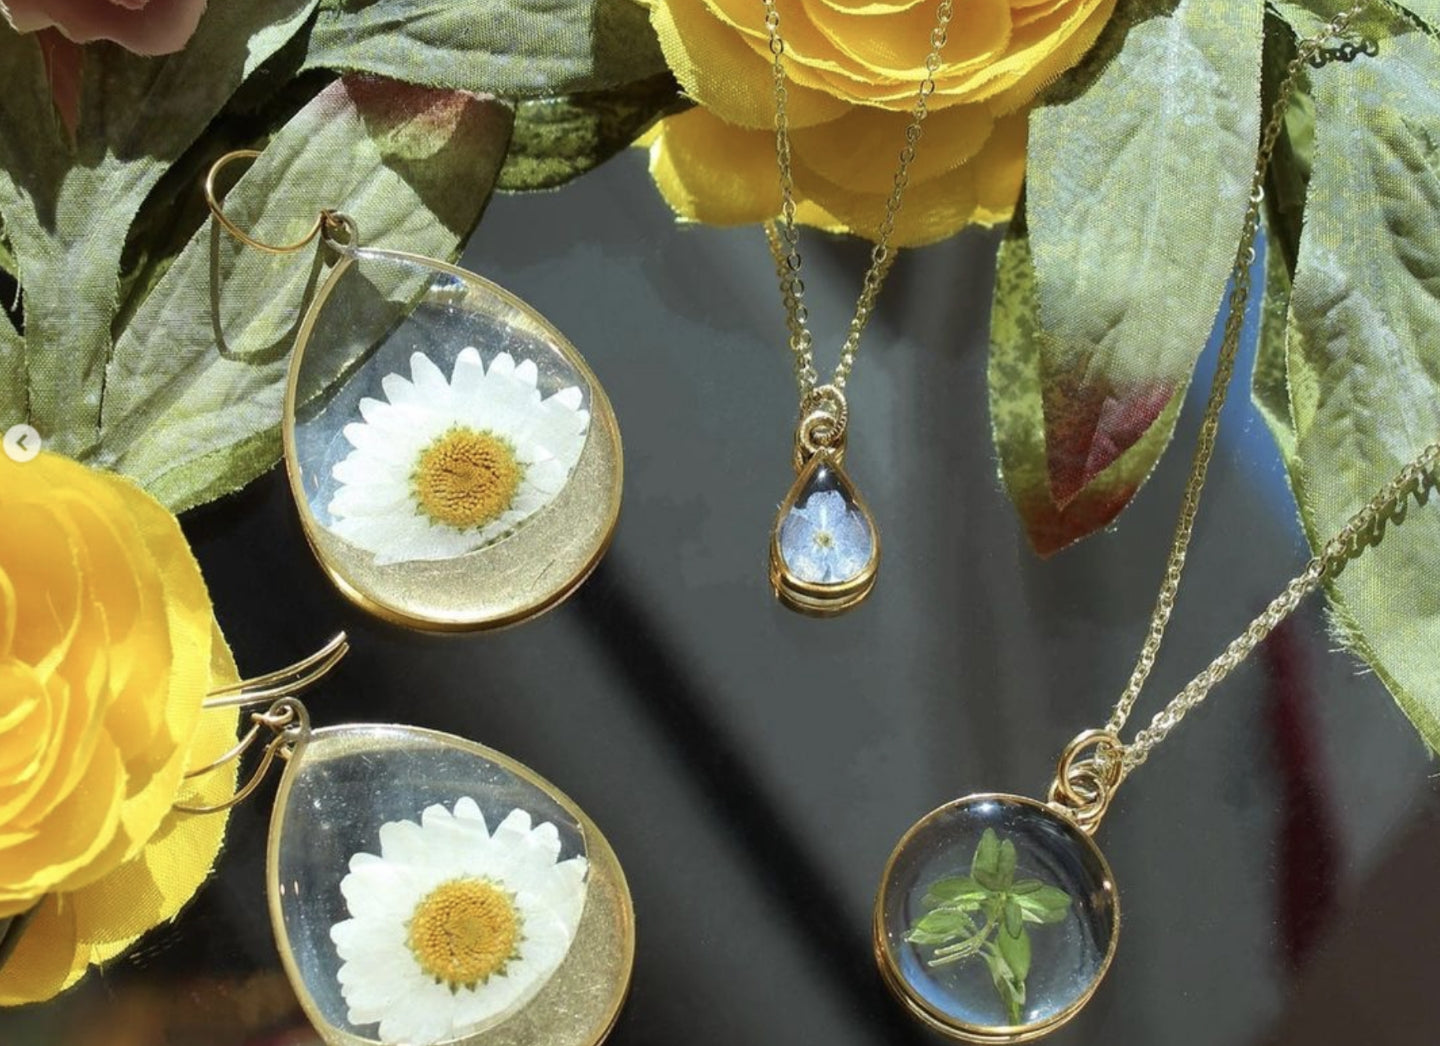 flower ensconced necklaces and earrings made by Seed & Soil